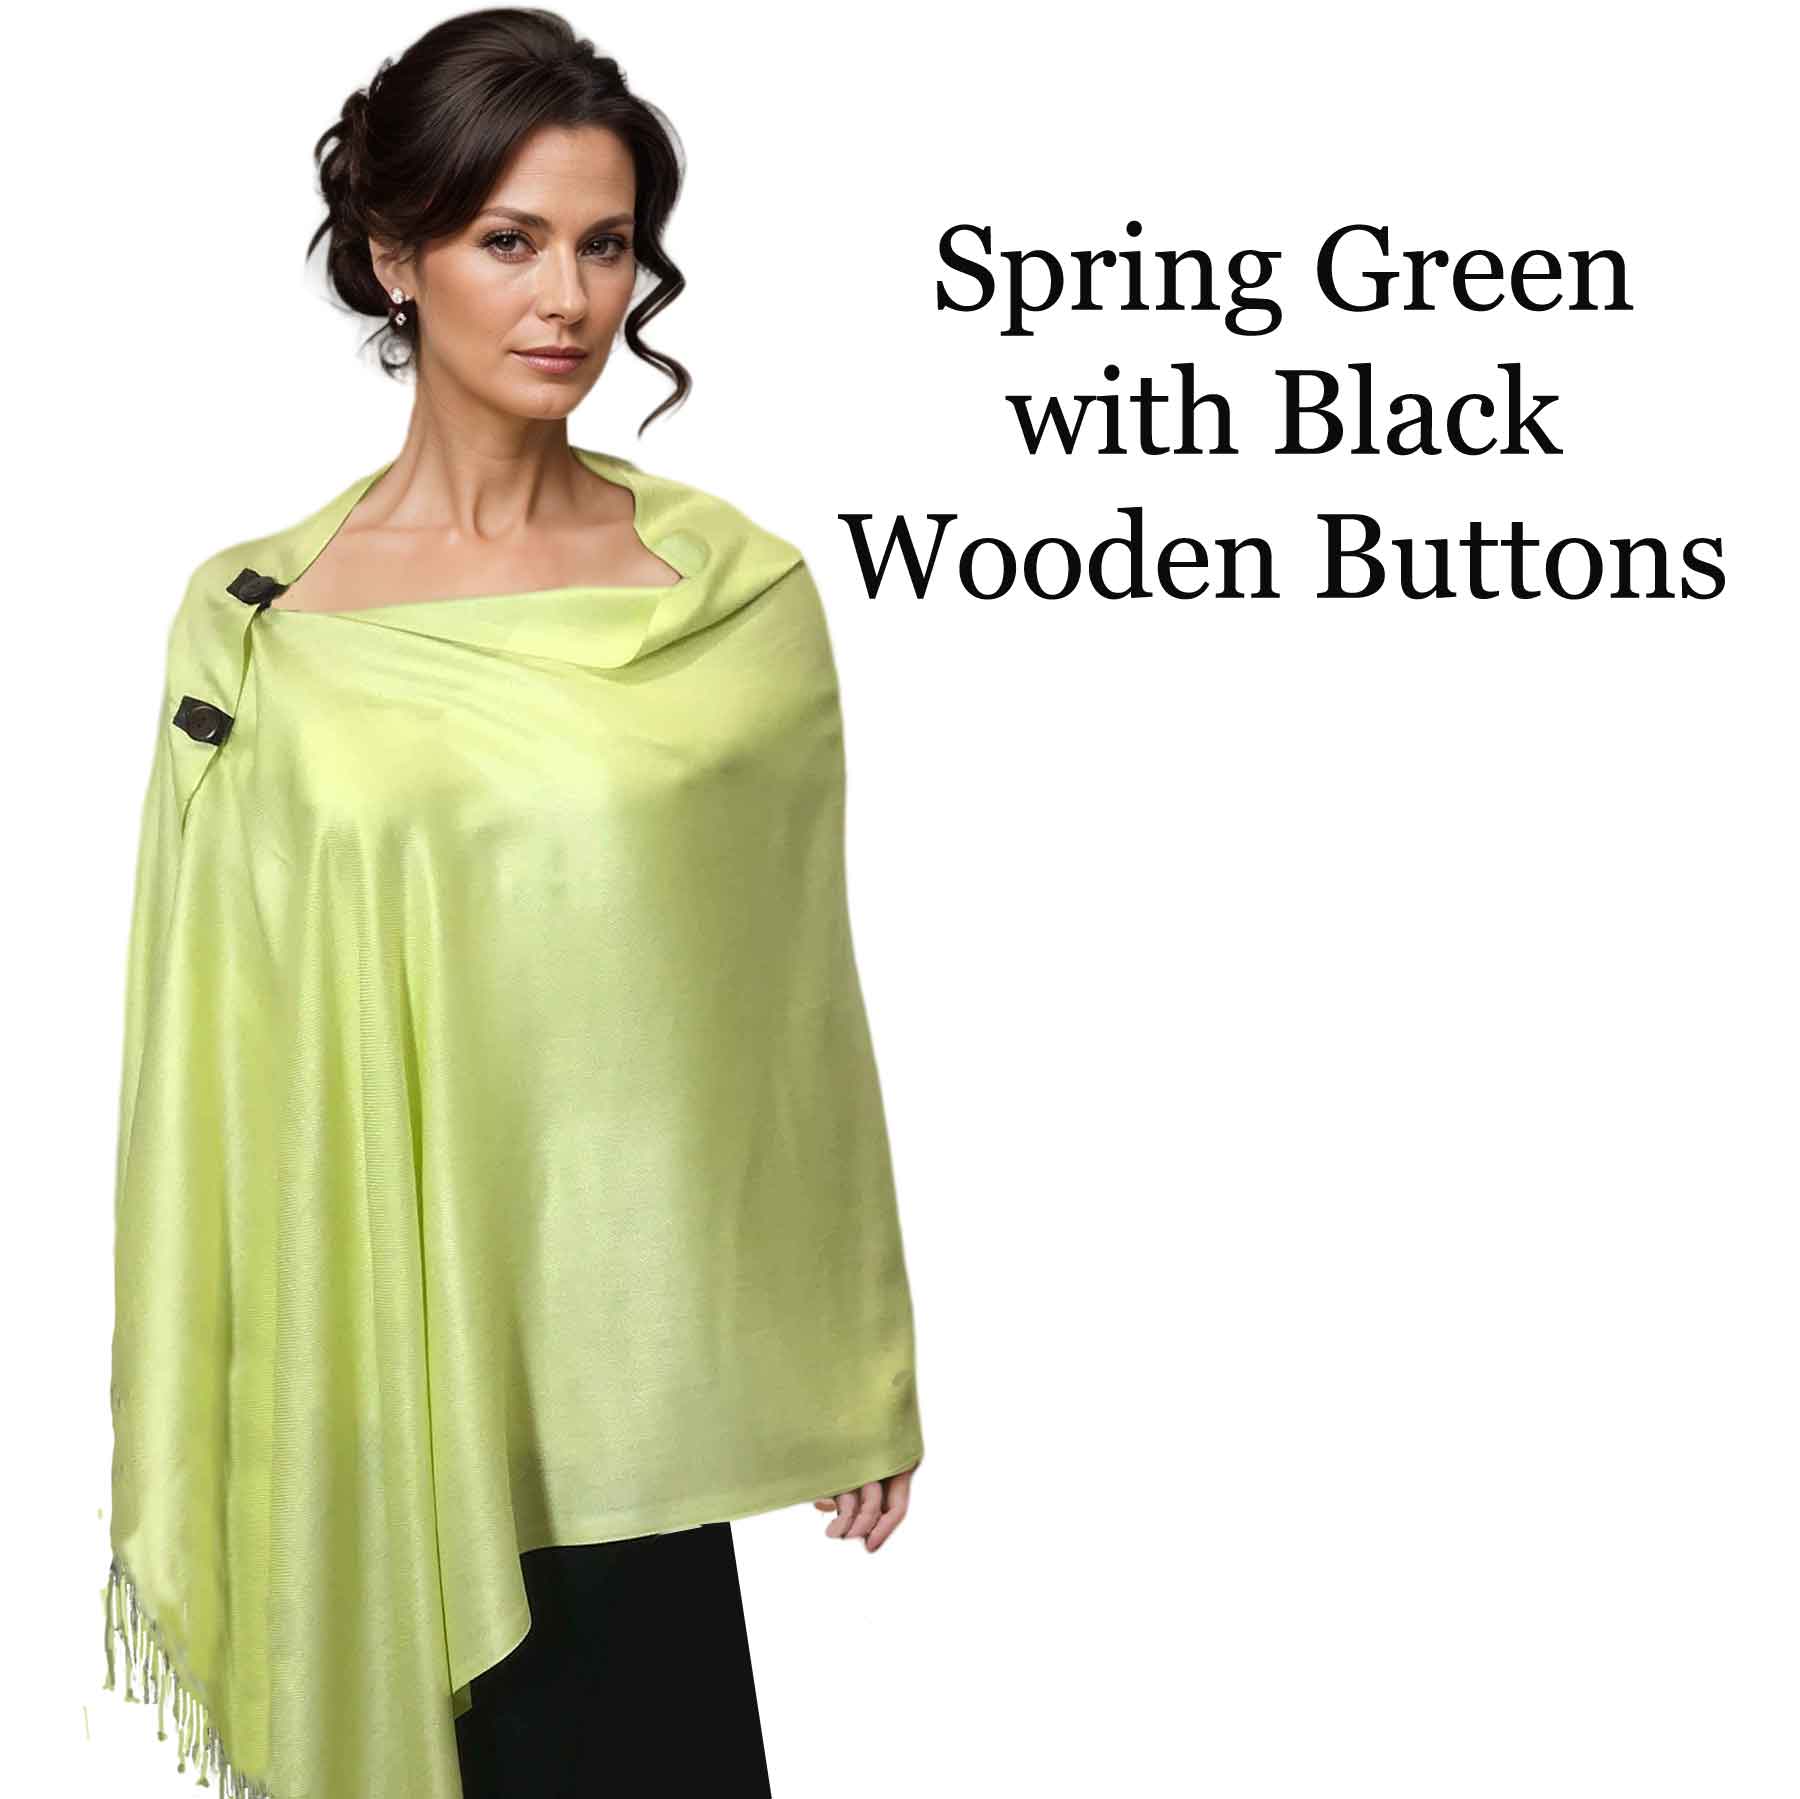 Solid Spring Green<br>
Pashmina Style Button Shawl